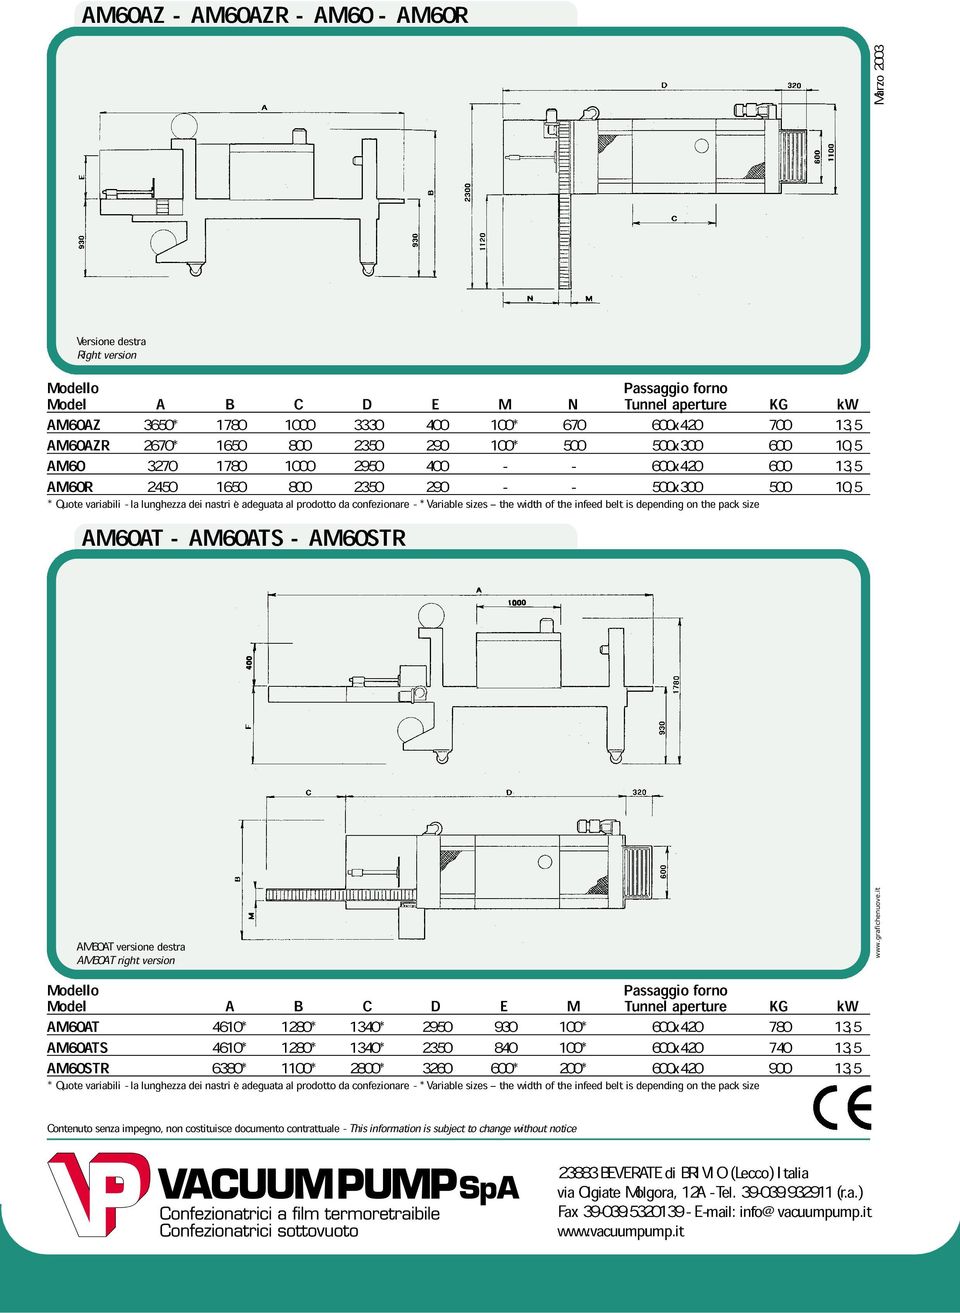 al prodotto da confezionare - * Variable sizes the width of the infeed belt is depending on the pack size AM60AT - AM60ATS - AM60AT versione destra AM60AT right version Modello Model A B C D E M